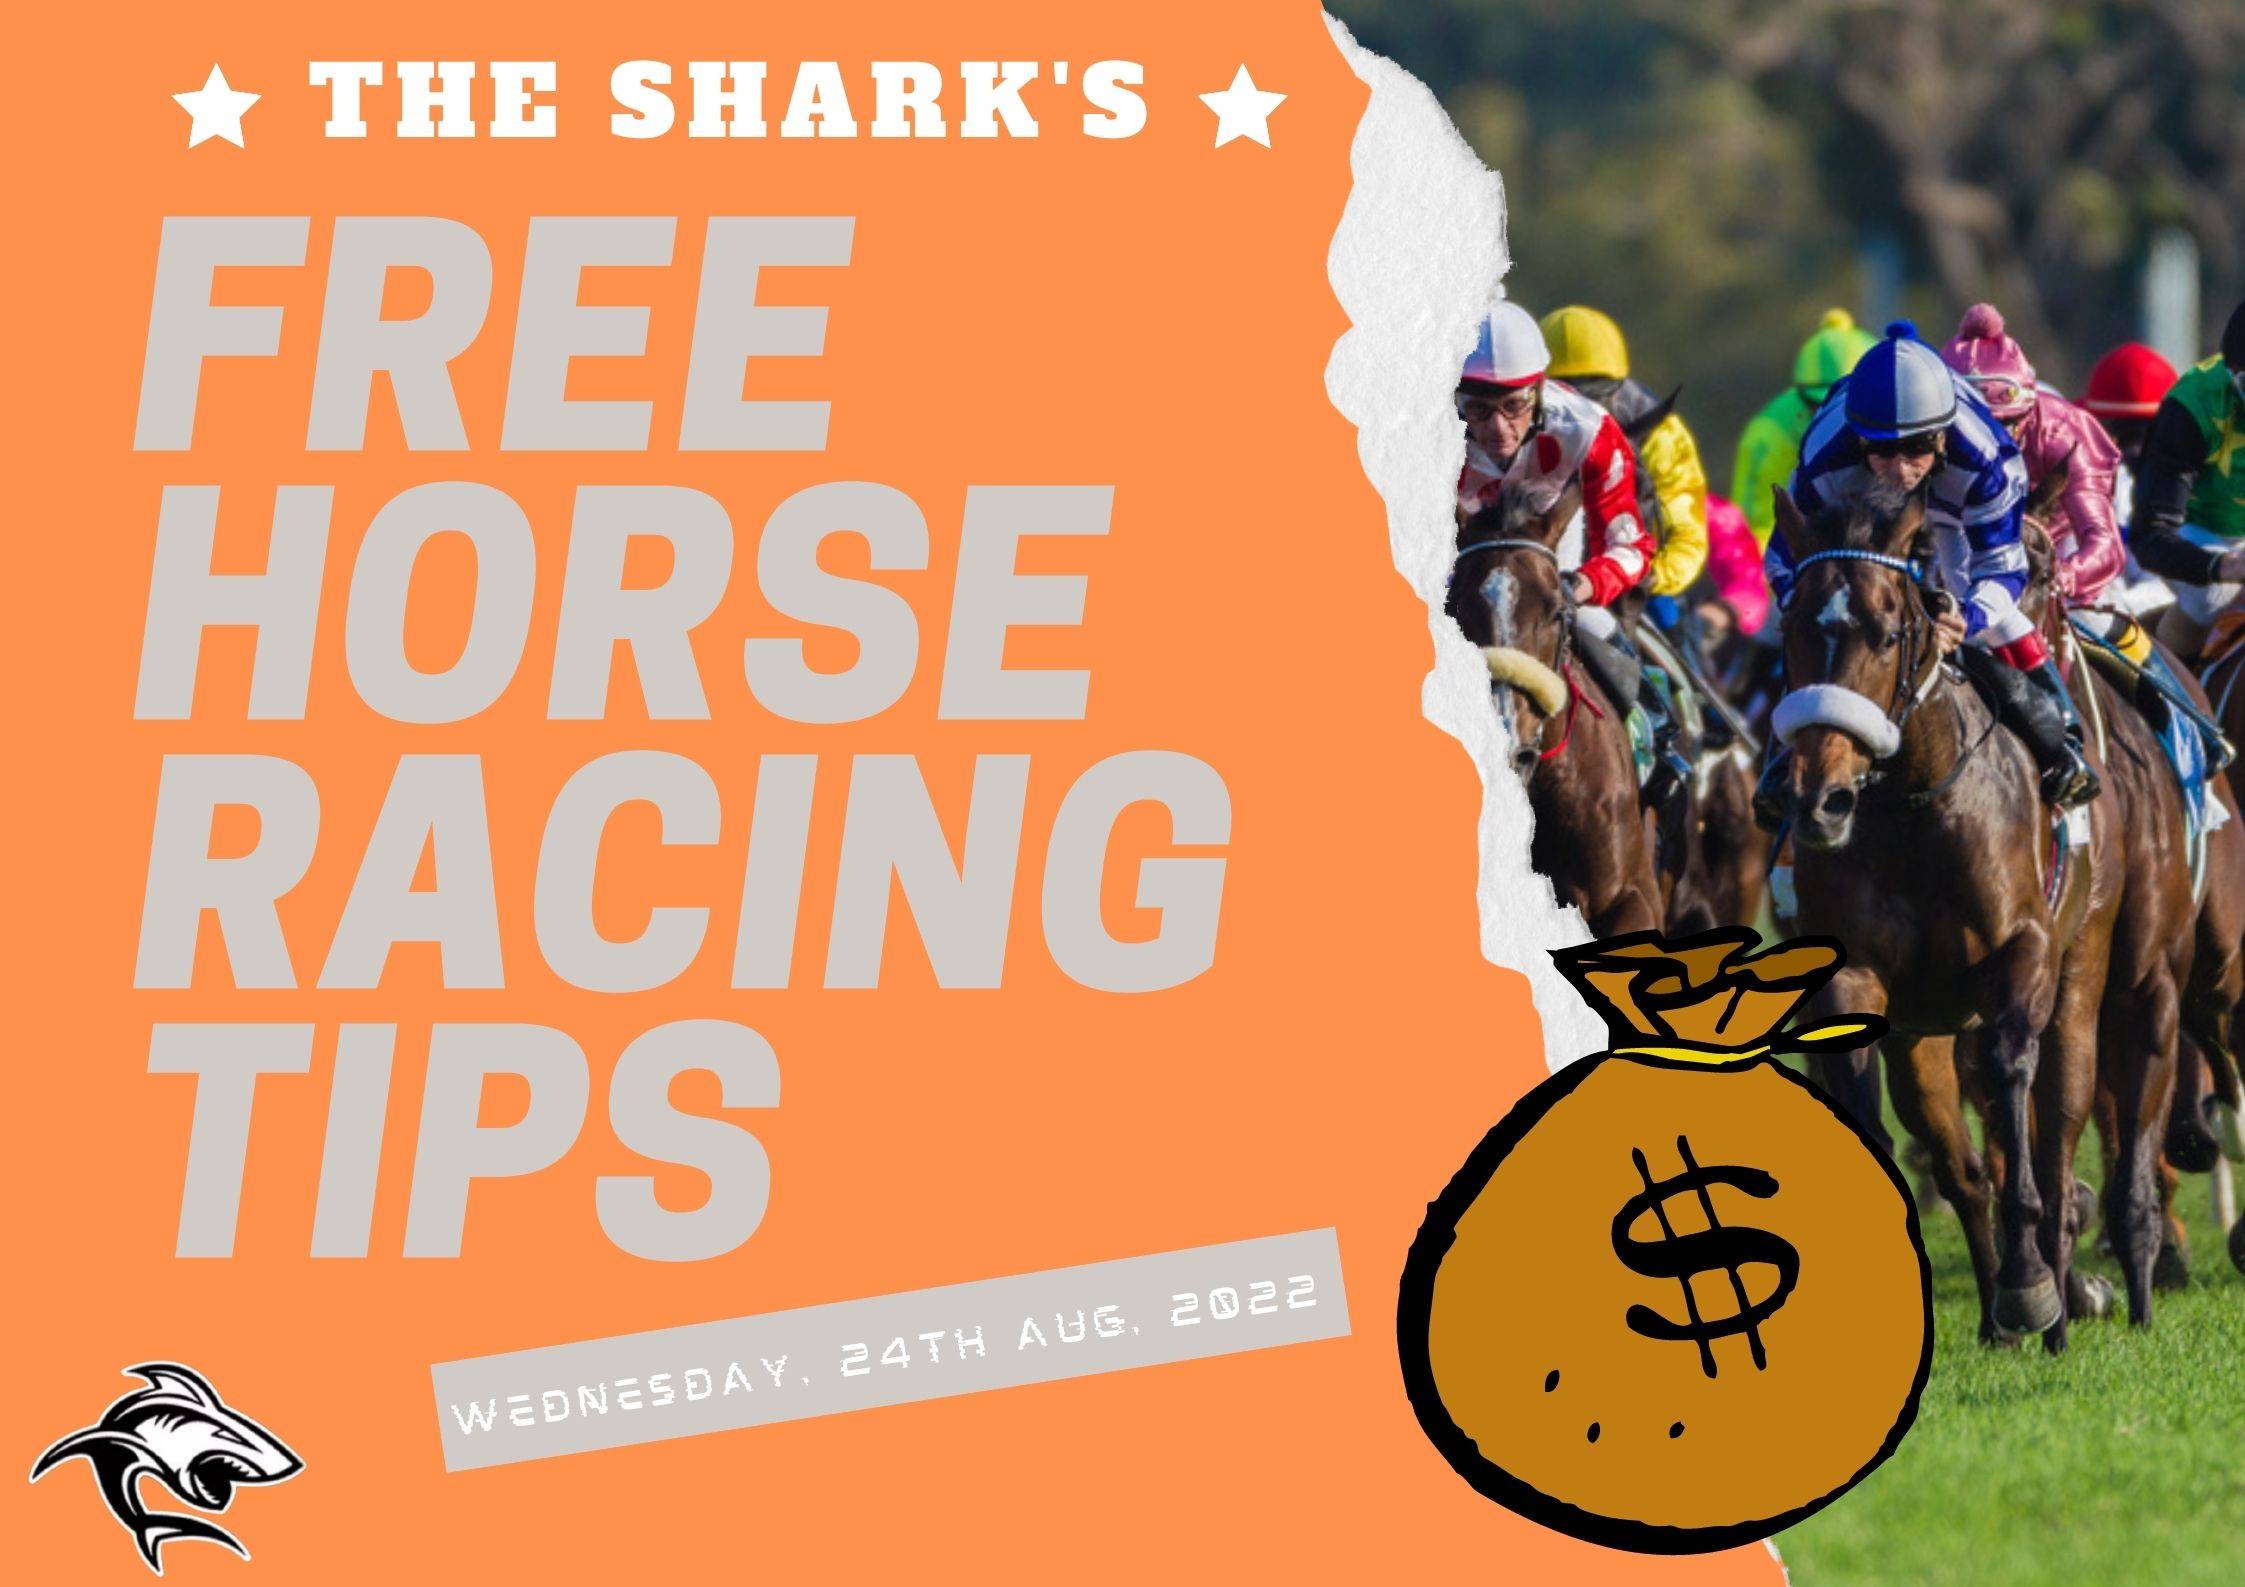 Free Horse Racing Tips - 24th Aug